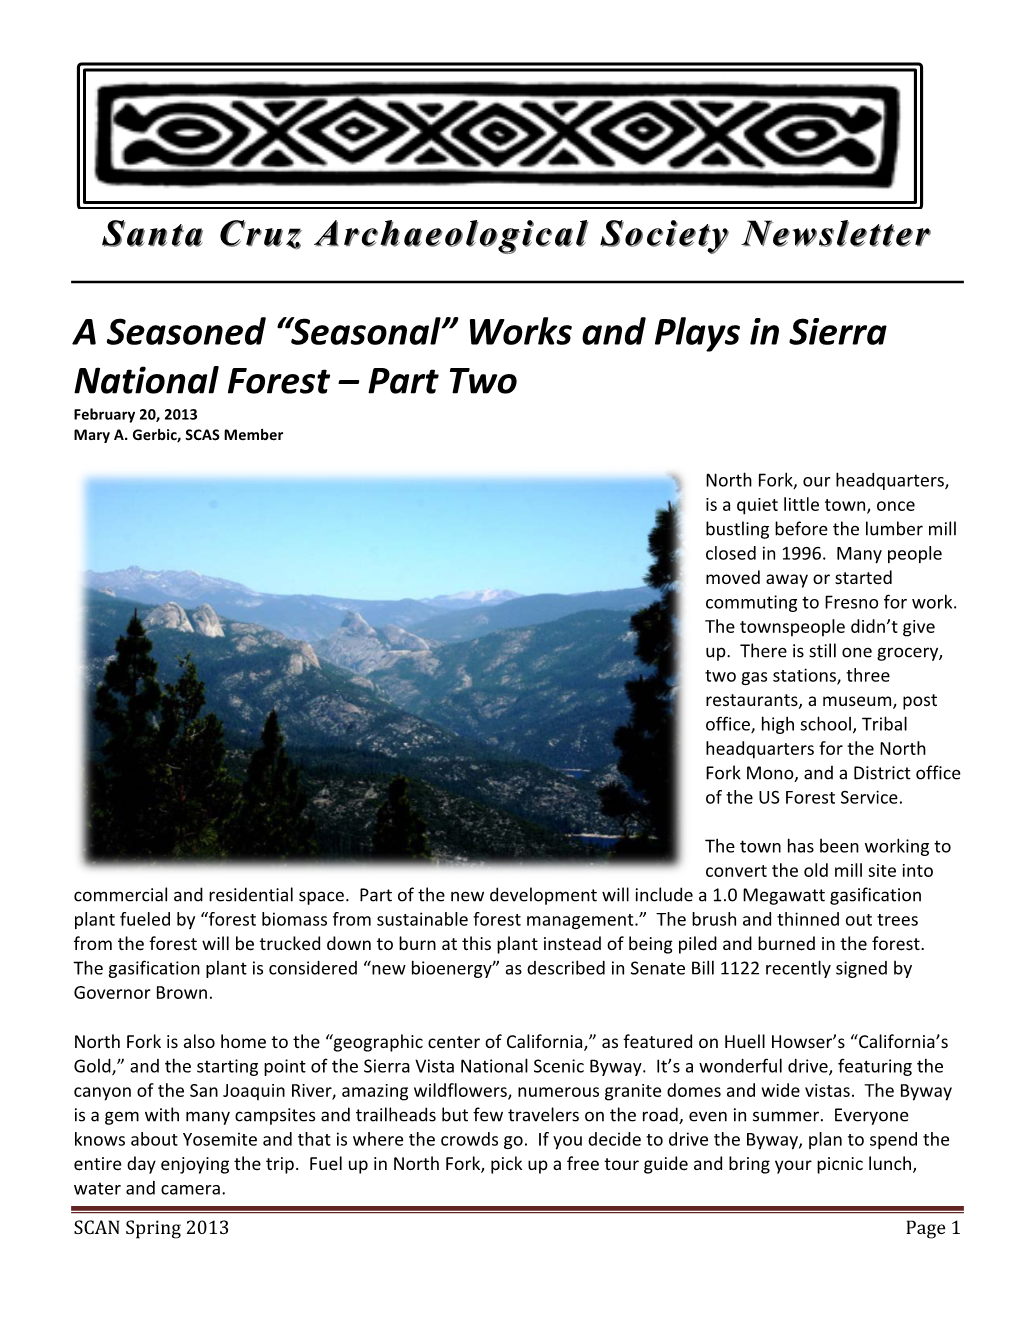 “Seasonal” Works and Plays in Sierra National Forest – Part Two February 20, 2013 Mary A